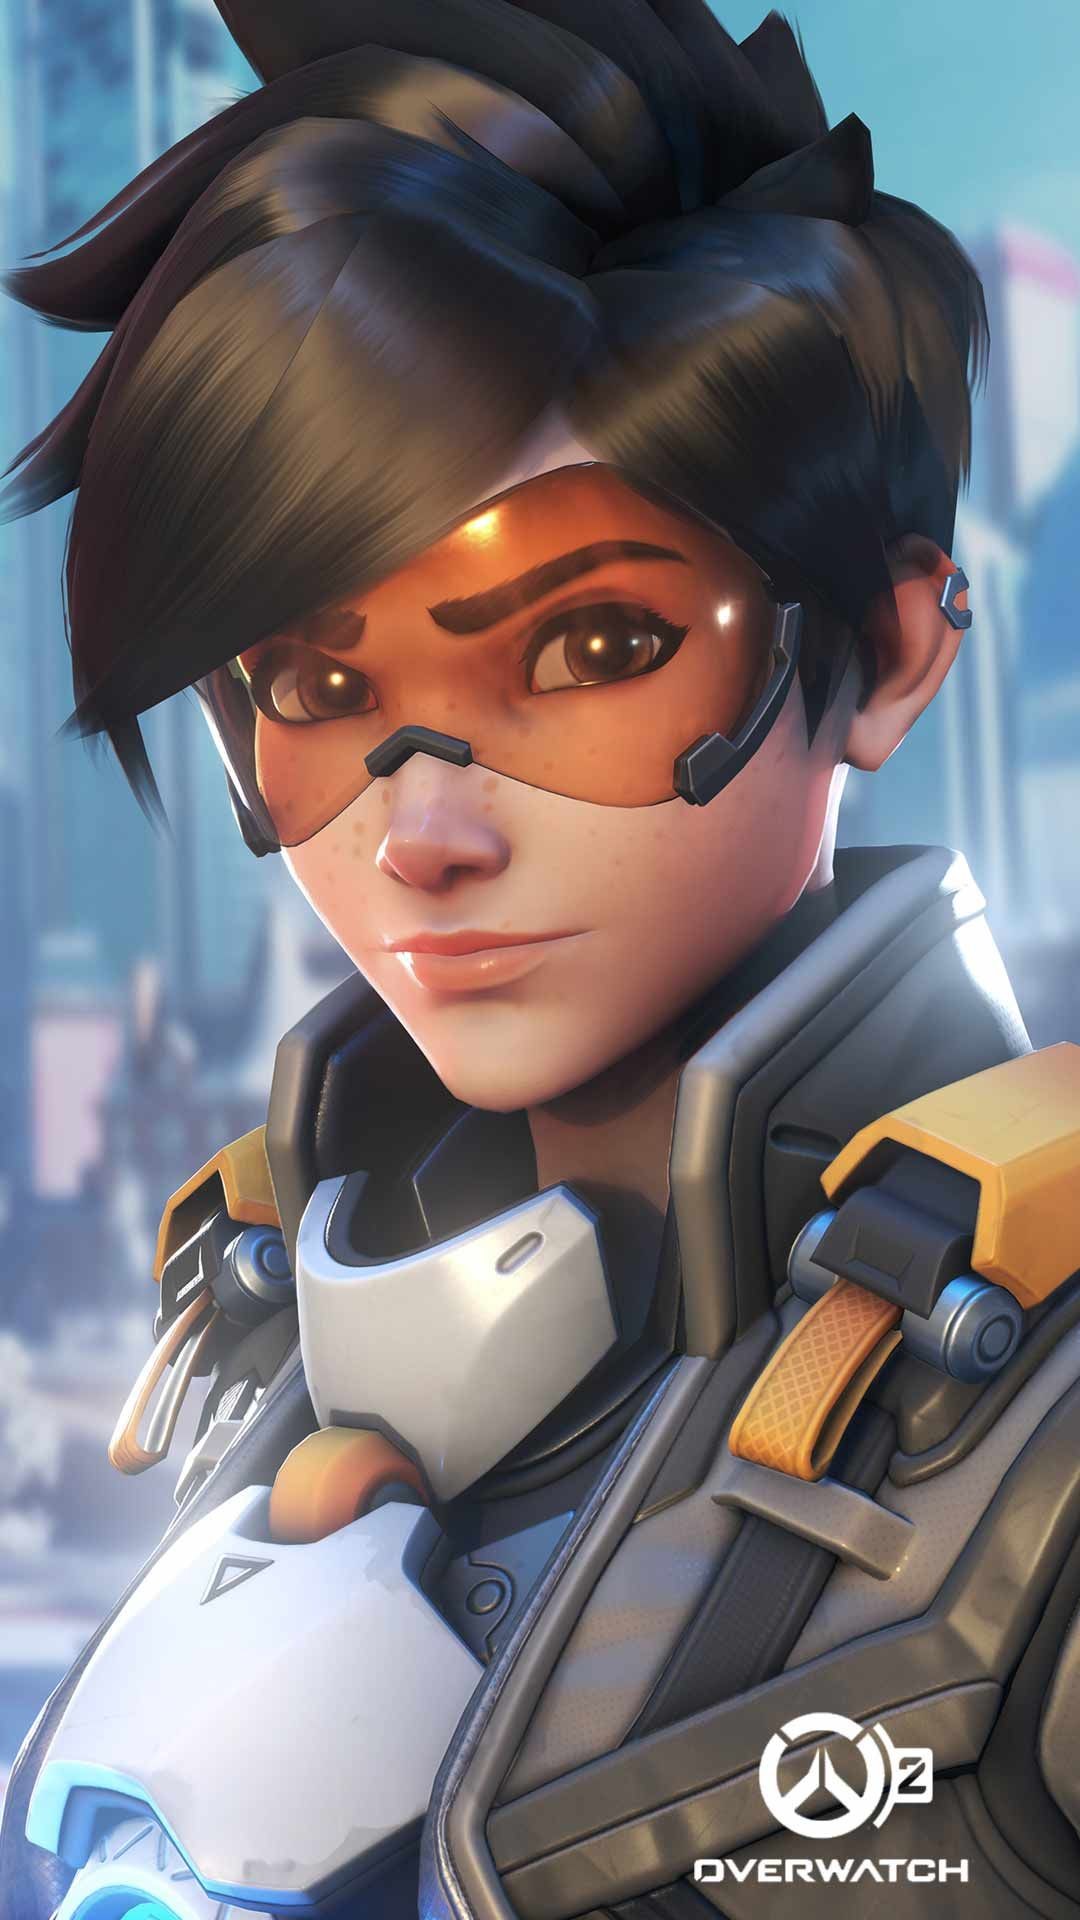 Overwatch Tracer Wallpaper (best Overwatch Tracer Wallpaper and image) on WallpaperChat